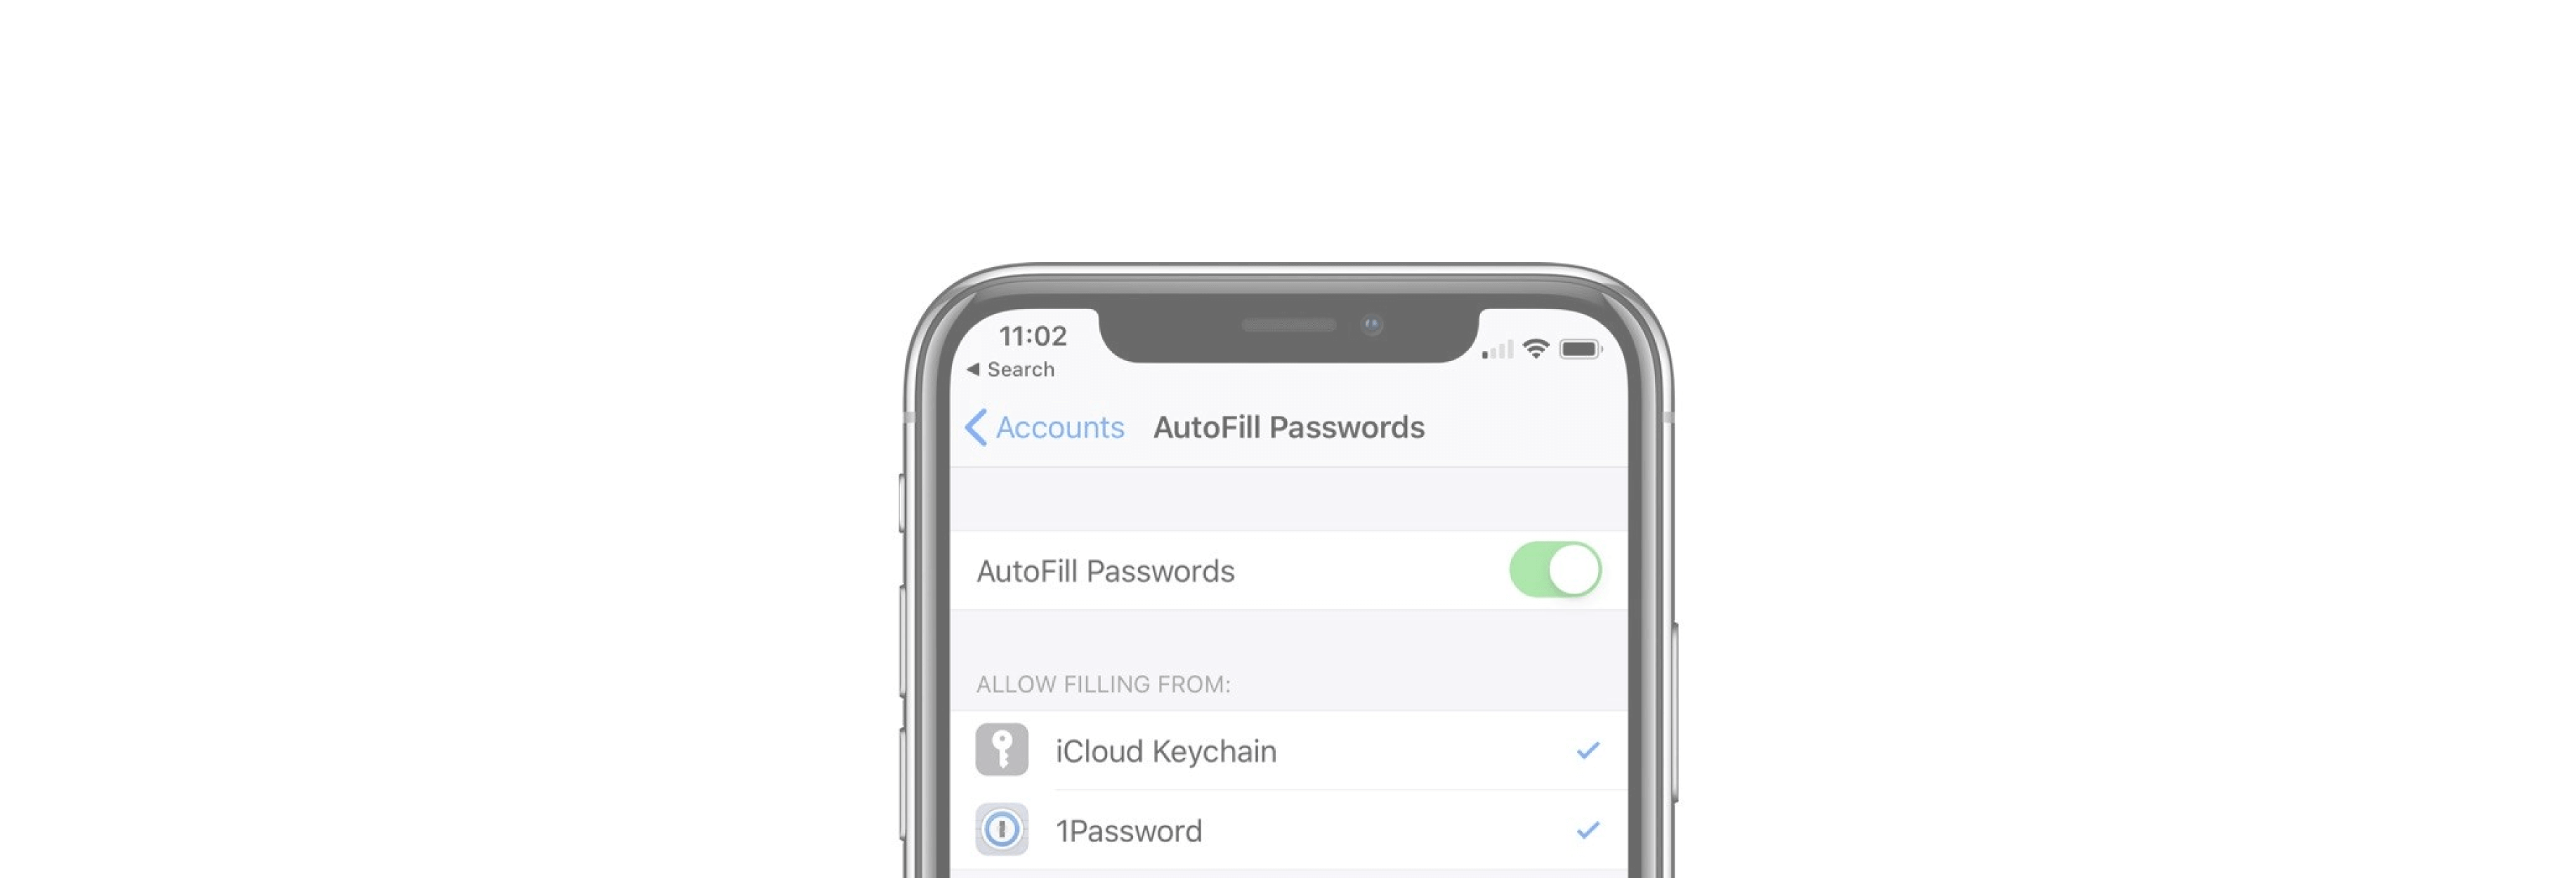 How to set 1Password as you default AutoFill provider in iOS 12